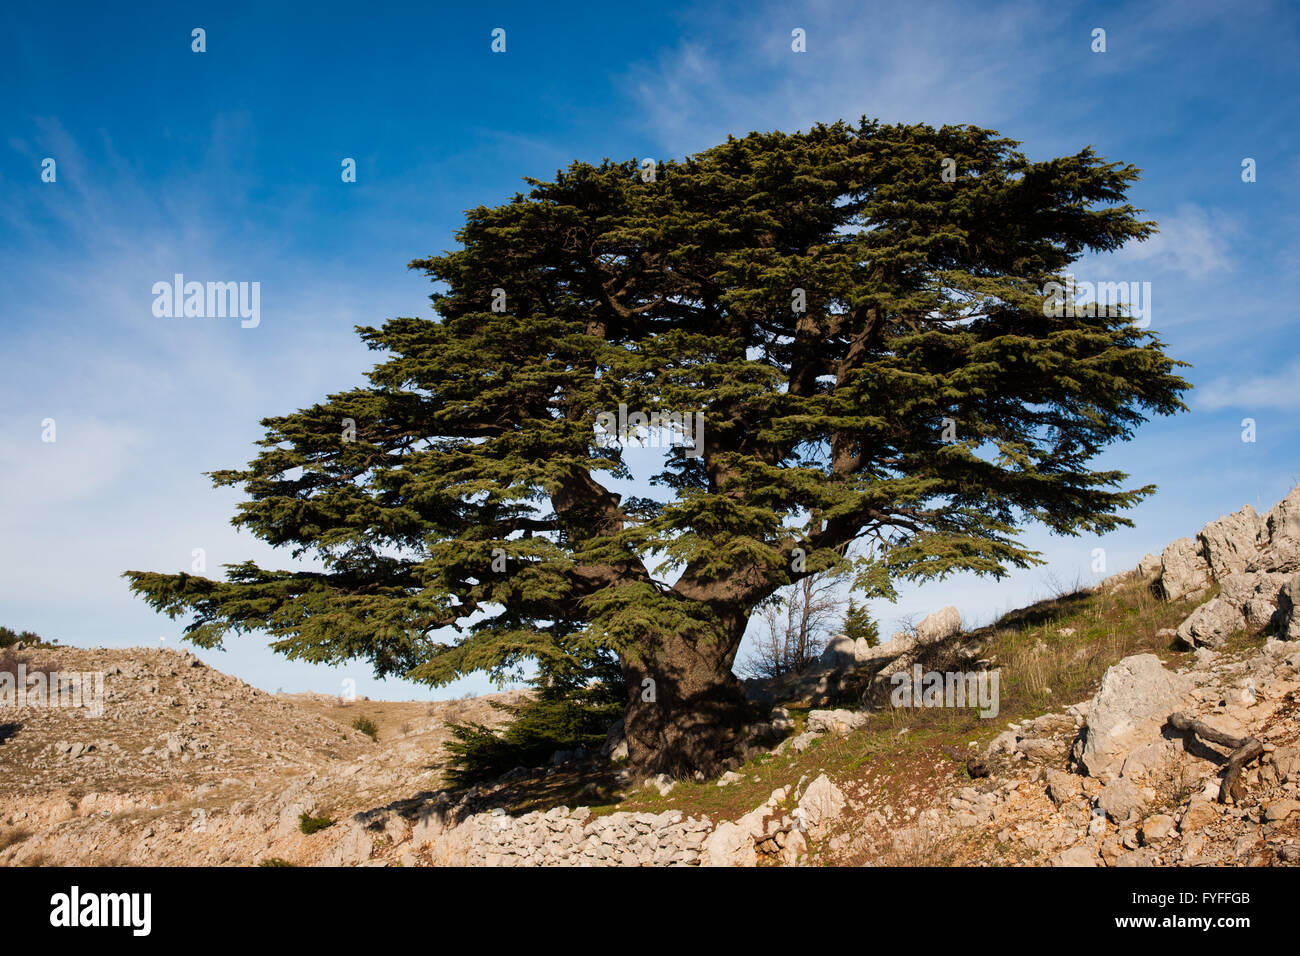 Lebanese Cedar tree, Barouk National Reserve, Chouf, Lebanon. This tree was used as a model for the Lebanese flag. Stock Photo